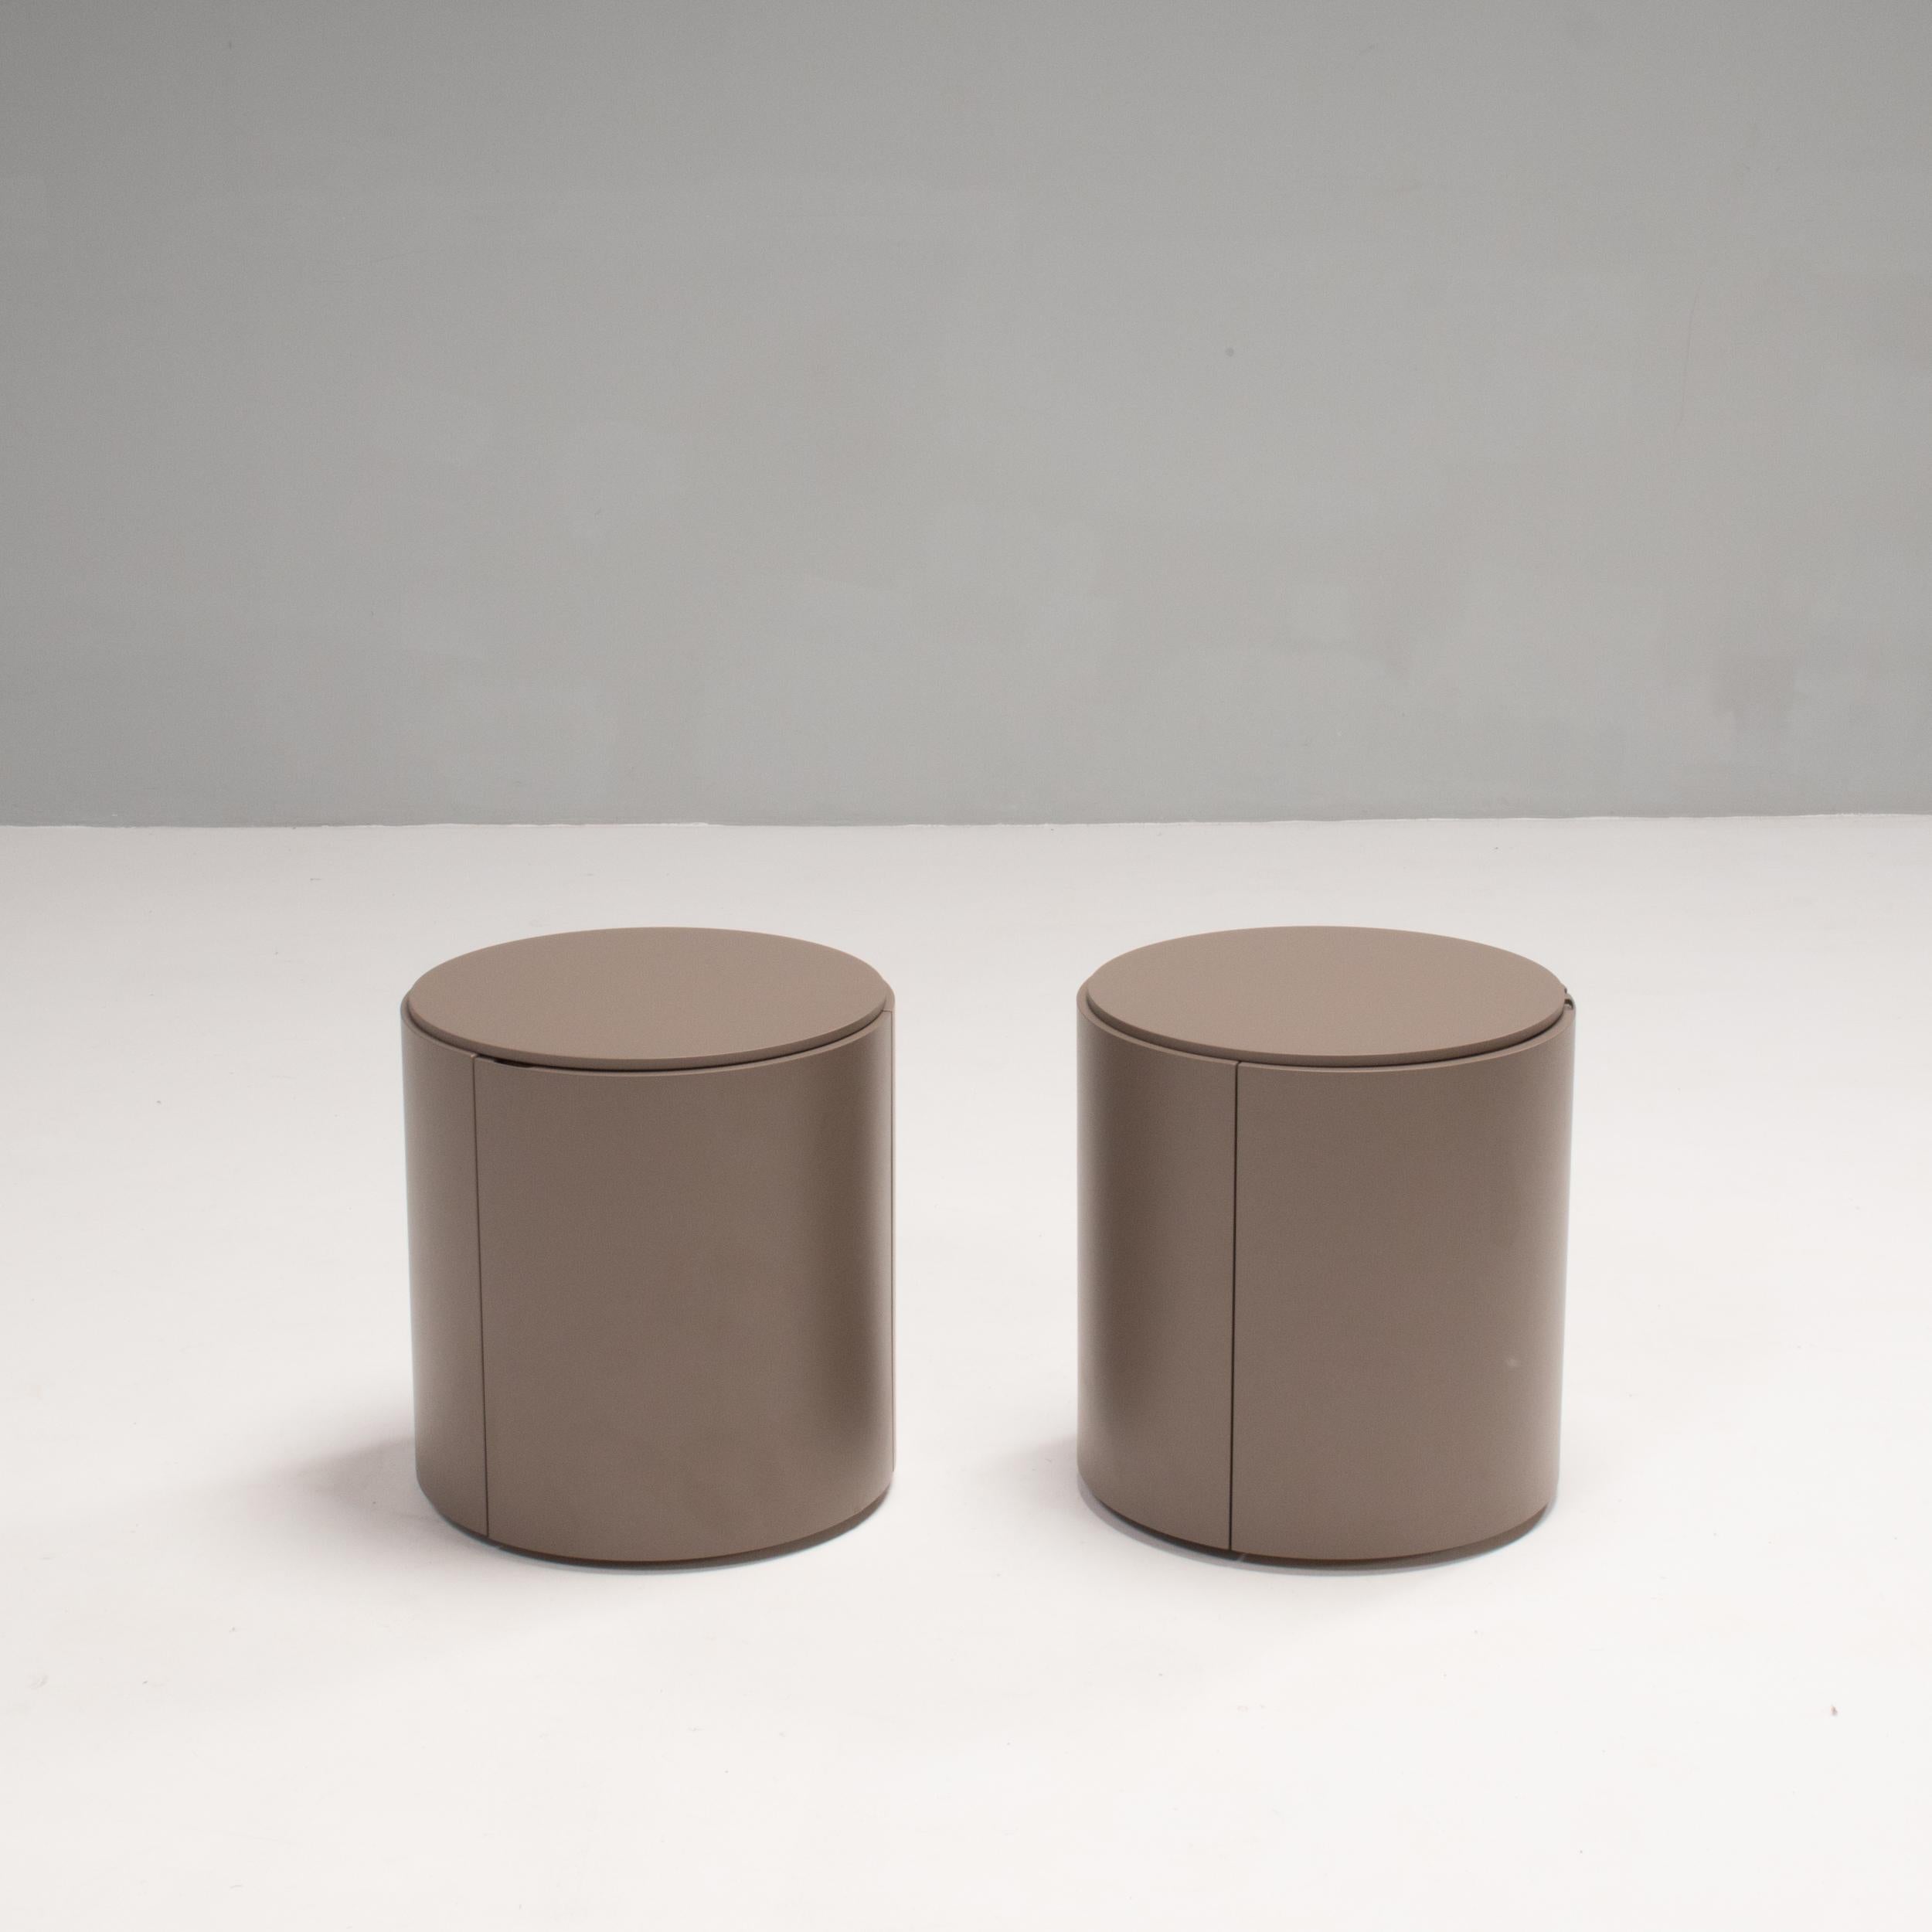 Originally designed by Ludovica and Roberto Palomba for Lema in 1999, the TOP bedside table is a fantastic example of modern design.

The cylindrical shape offers a seamless look with a taupe matte lacquered finish, while the curved door opens to